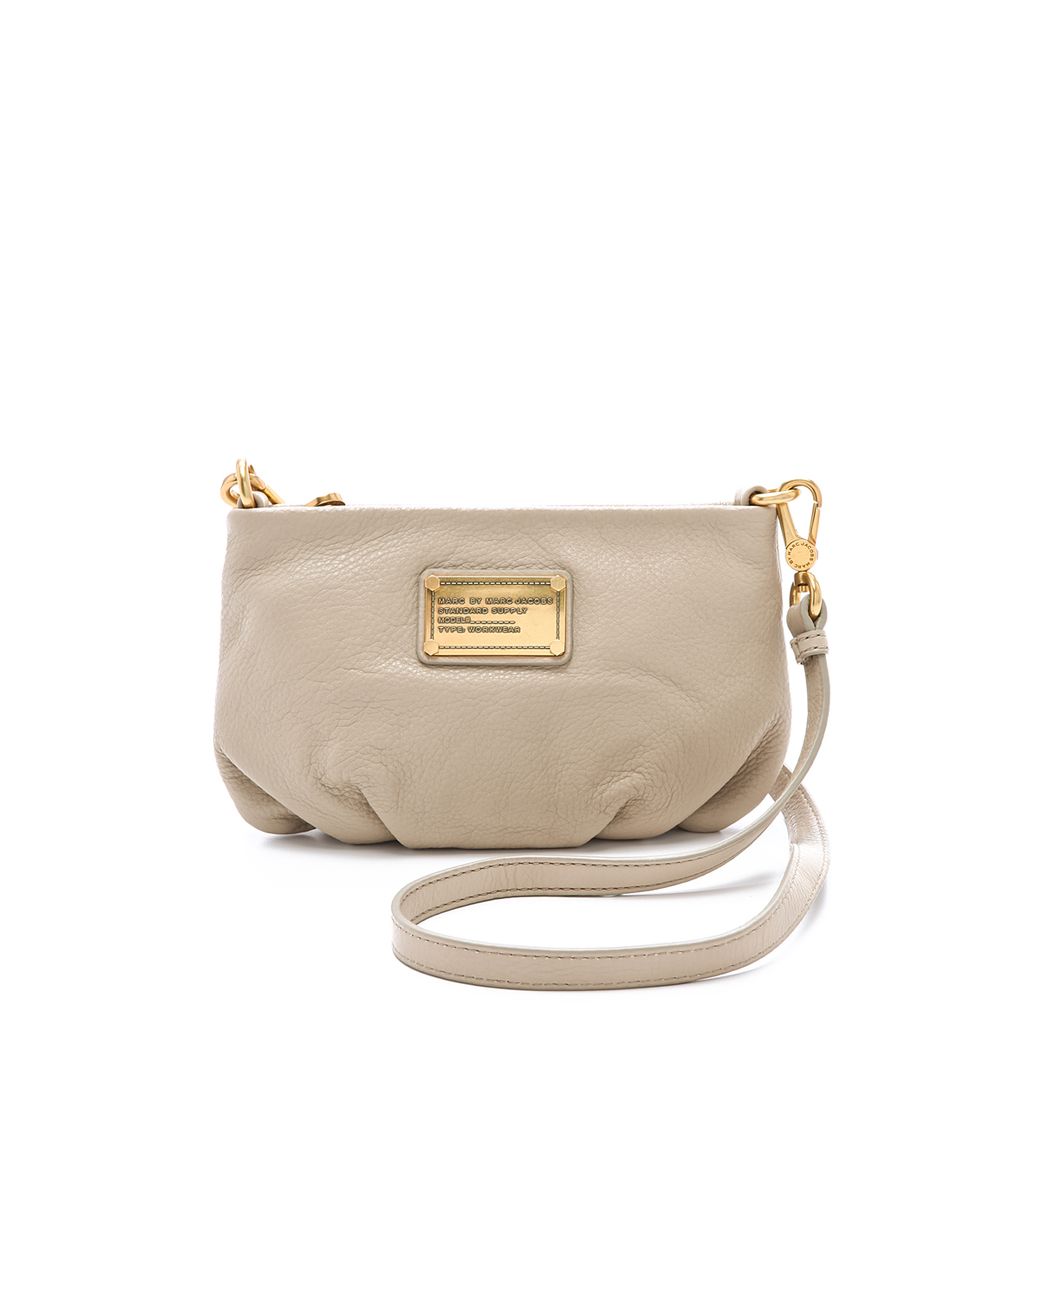 Marc By Marc Jacobs Classic Q Percy Cross Body Bag in Natural | Lyst